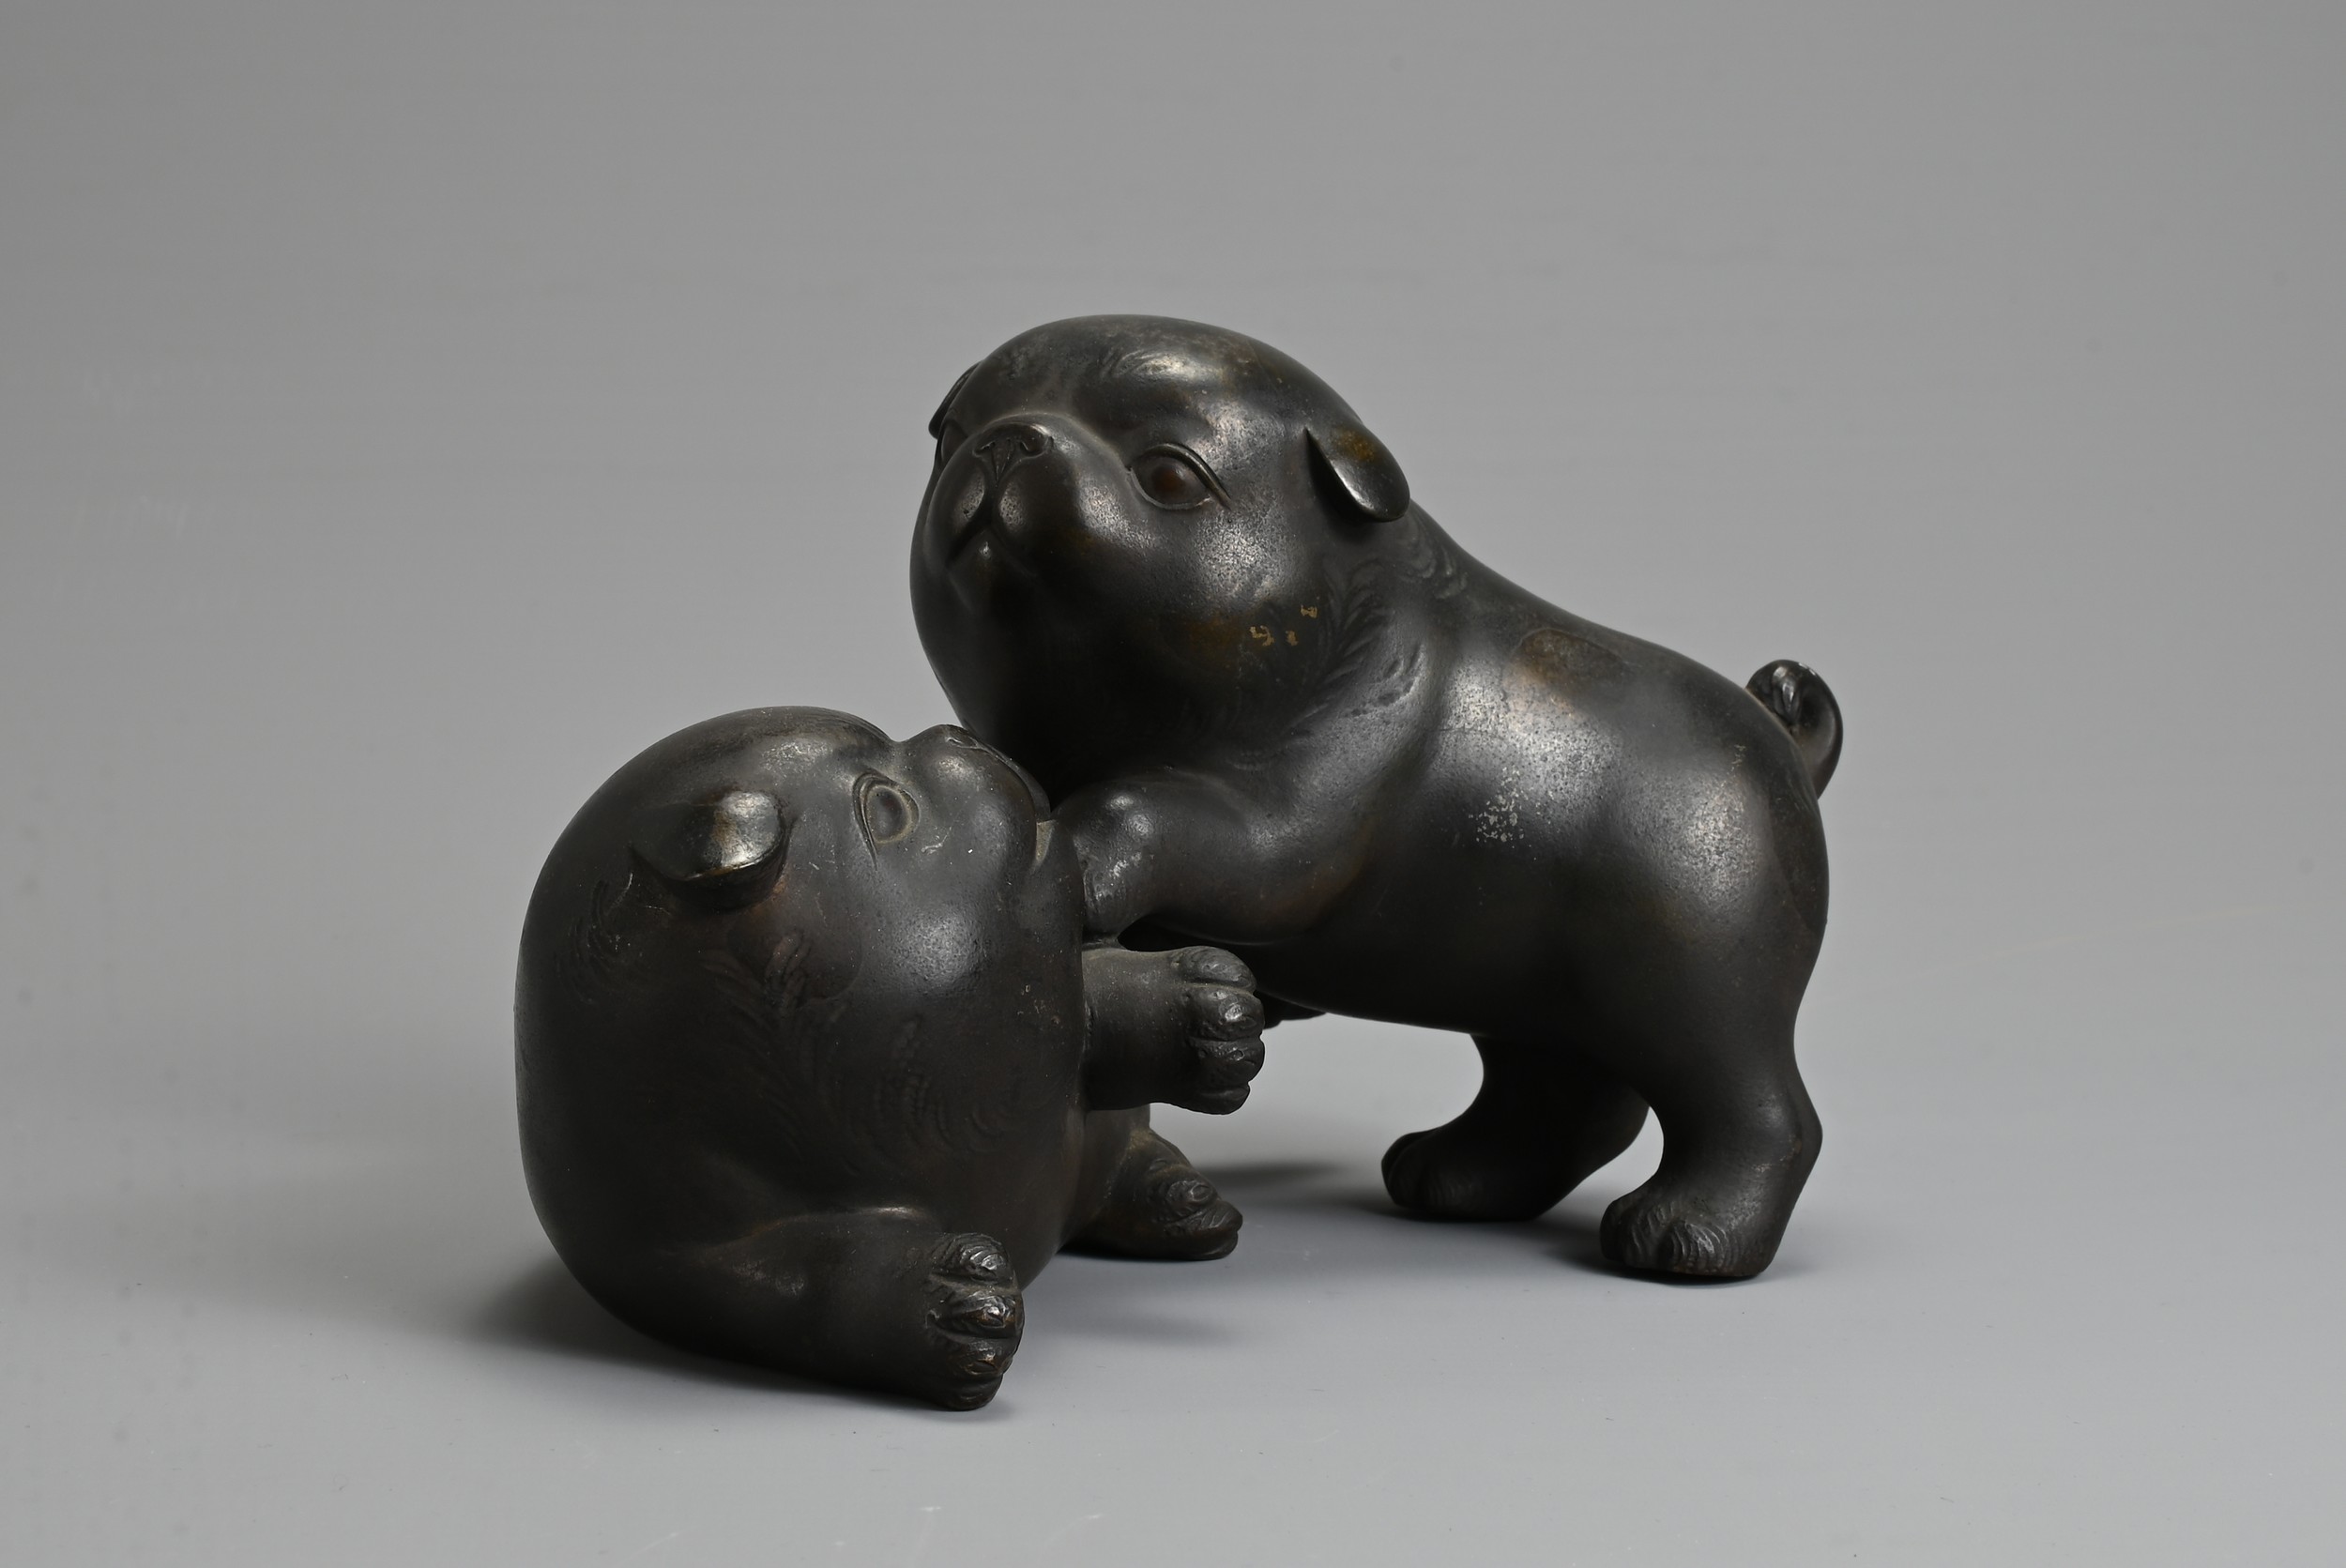 AN EARLY 20TH CENTURY JAPANESE BRONZE OF TWO PUPPIES PLAYING. Signed Tokutani with seal mark to - Image 4 of 7